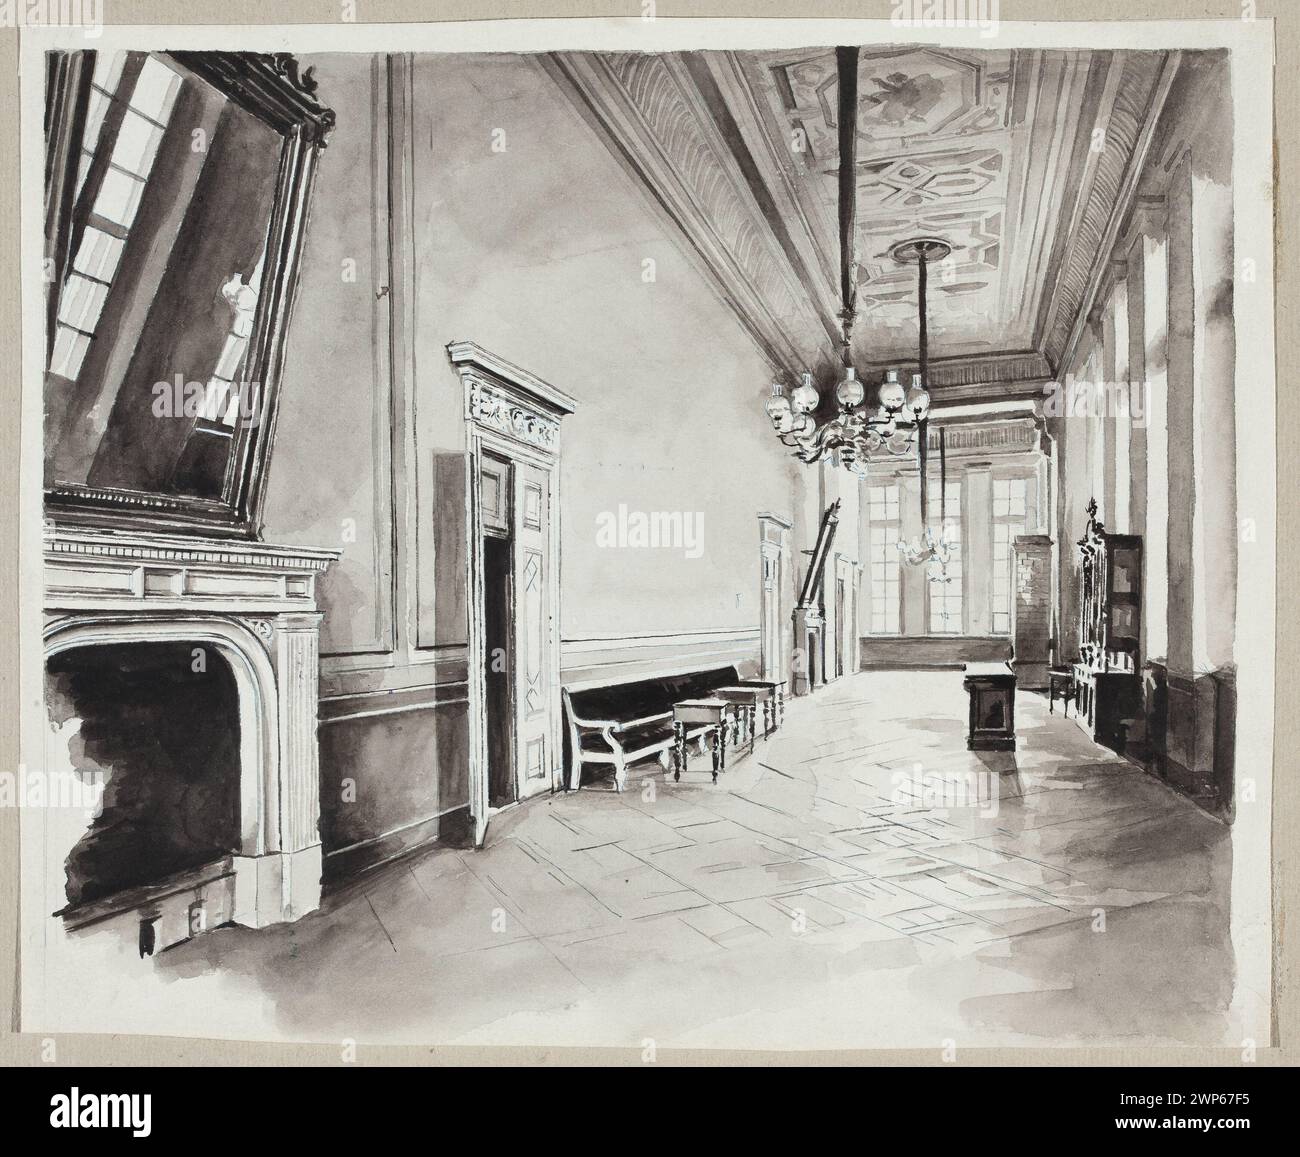 Foyer of the Grand Theater; Horseshoe, w Adys Aw (1866-1895); 1890 (1890-00-00-1890-00-00);Méyet, Leopold (1850-1912), Méyet, Leopold (1850-1912) - collection, Méyet, Leopold (1850-1912) - seal, Wielki Theater (Warsaw), Illustrated weekly (Warsaw - magazine - 1859-1939), weekly Illustrated (Warsaw - magazine - 1859-1939) - illustration, gift (provenance), foyer (archite. collection, chandeliers Stock Photo